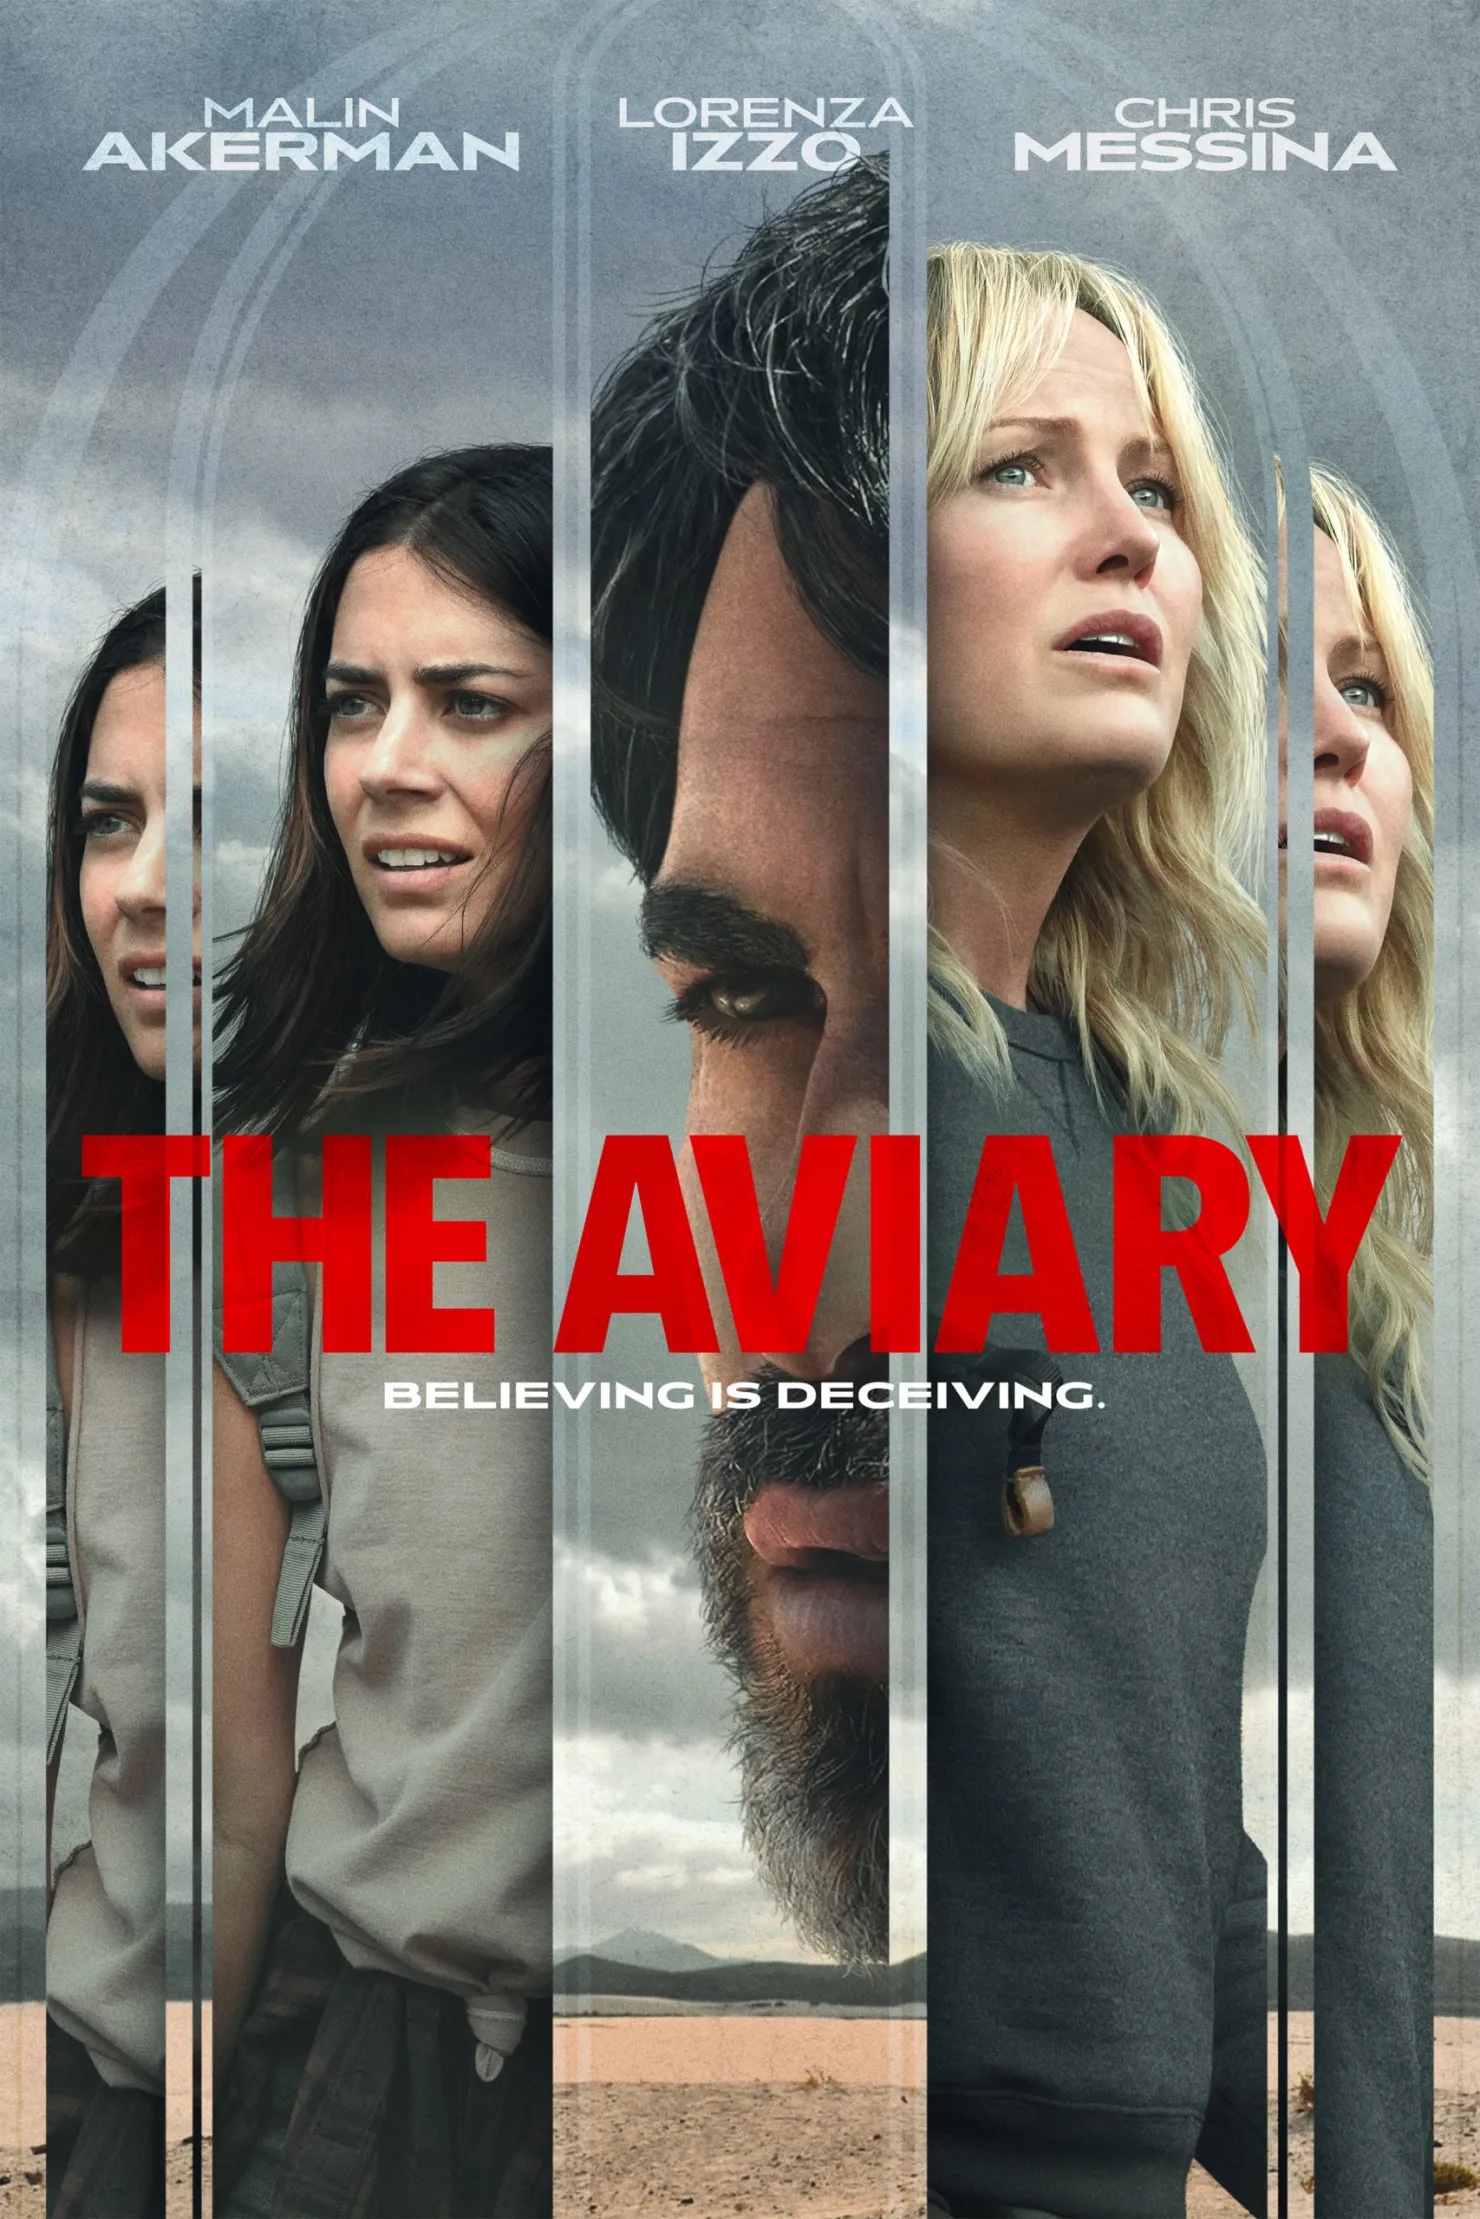 The Aviary Trailer & Poster